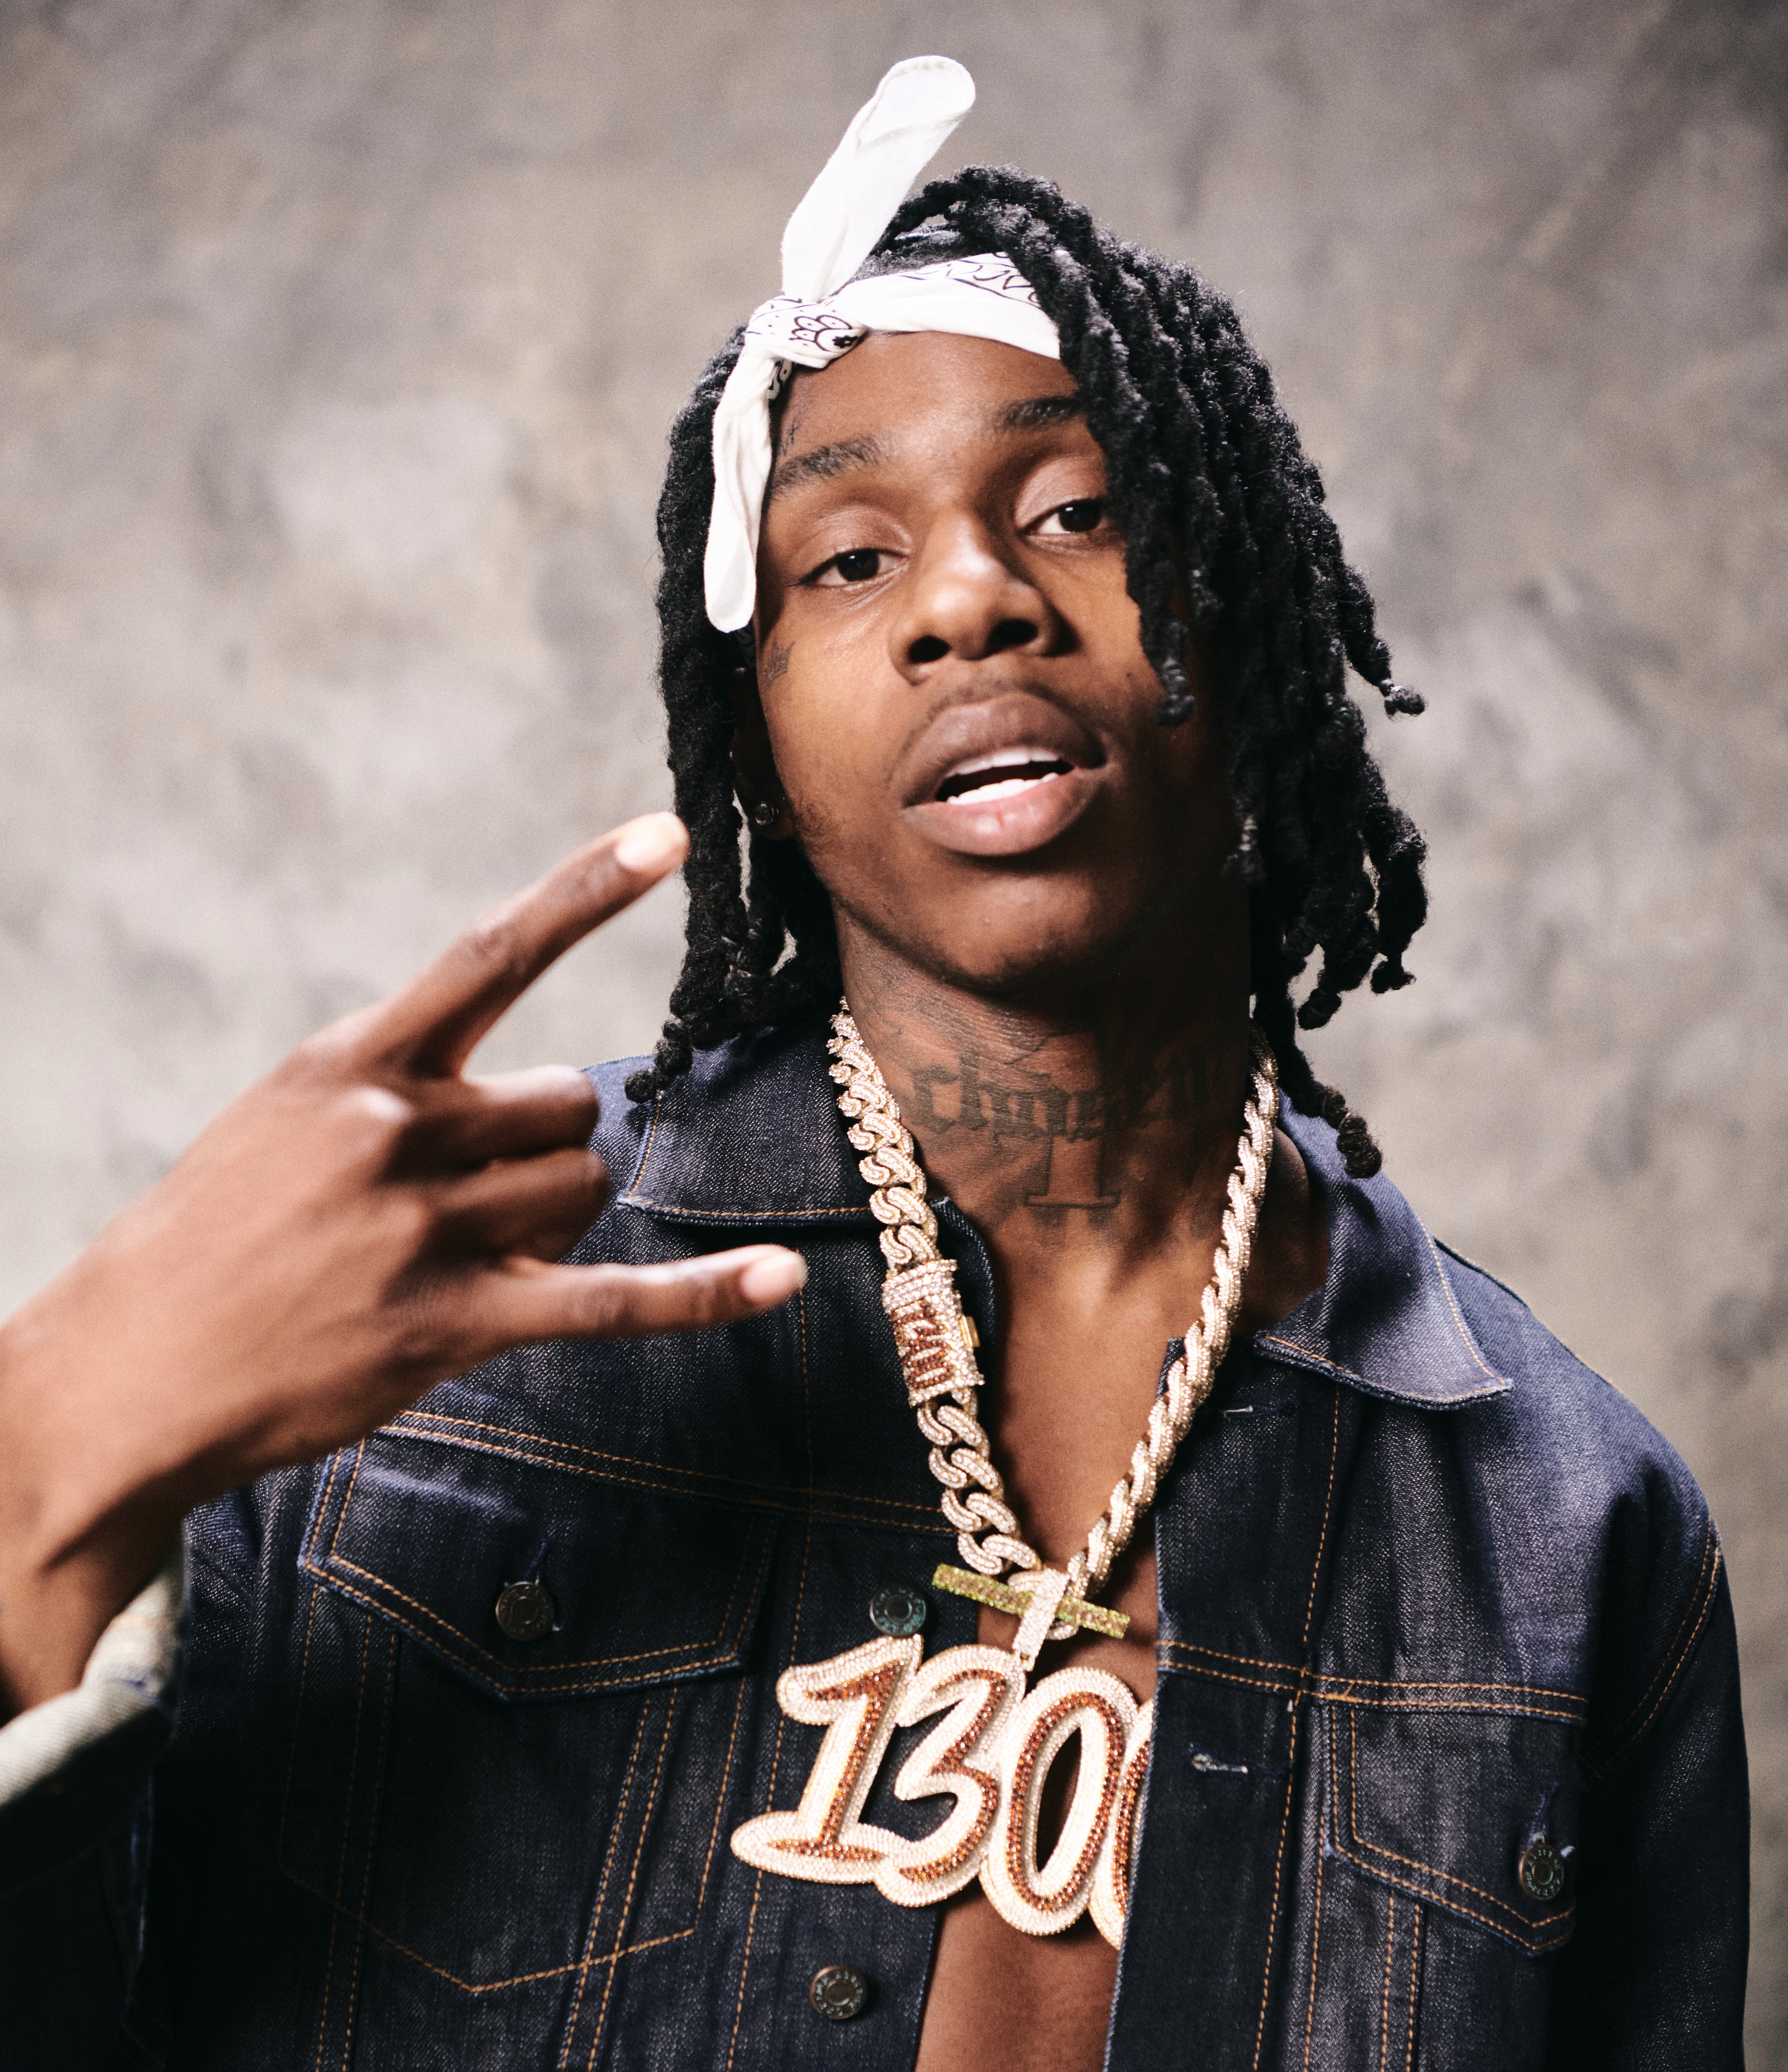 Polo G Lives Up To 'RapStar' Name With Billboard Hot 100 Crown